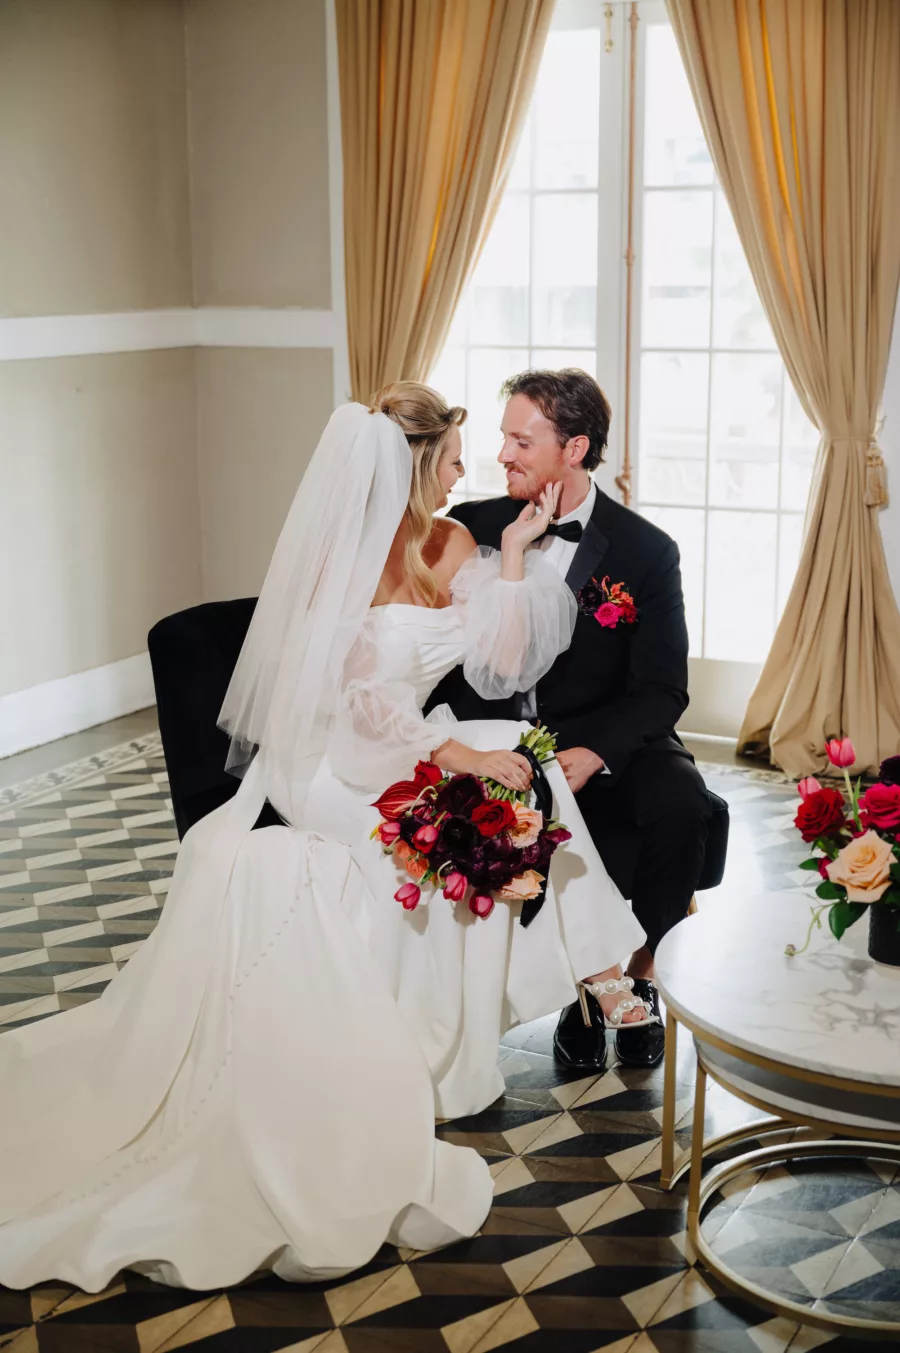 Bride and Groom Just Married Wedding Portrait | Tampa Bay Photographer McNeile Photography | Ybor Content Creator Behind The Vows